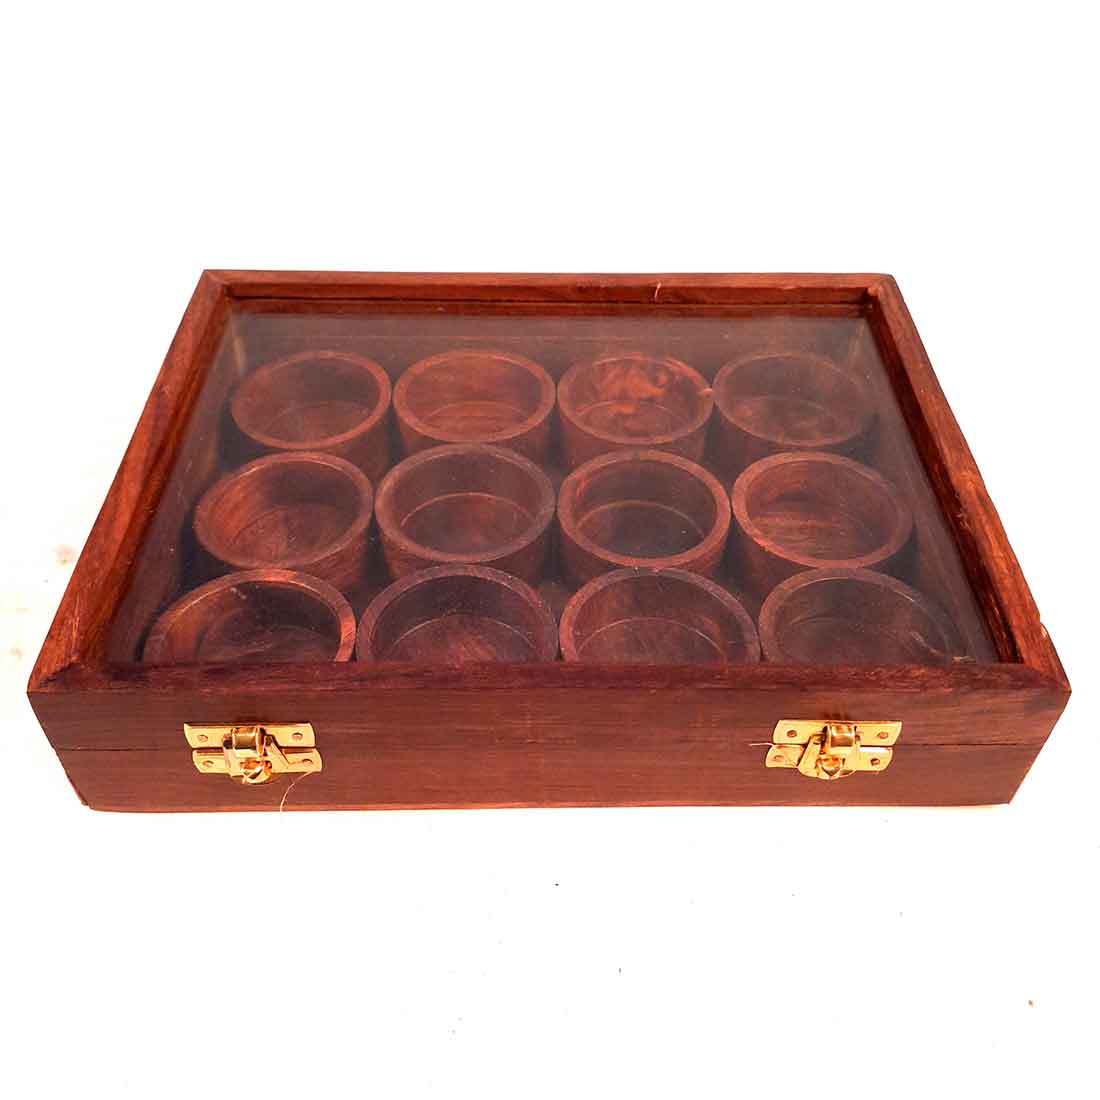 Spice Storage Box - Spice Container with Glass Lid - for Kitchen & Table Top - 10 Inch - ApkaMart